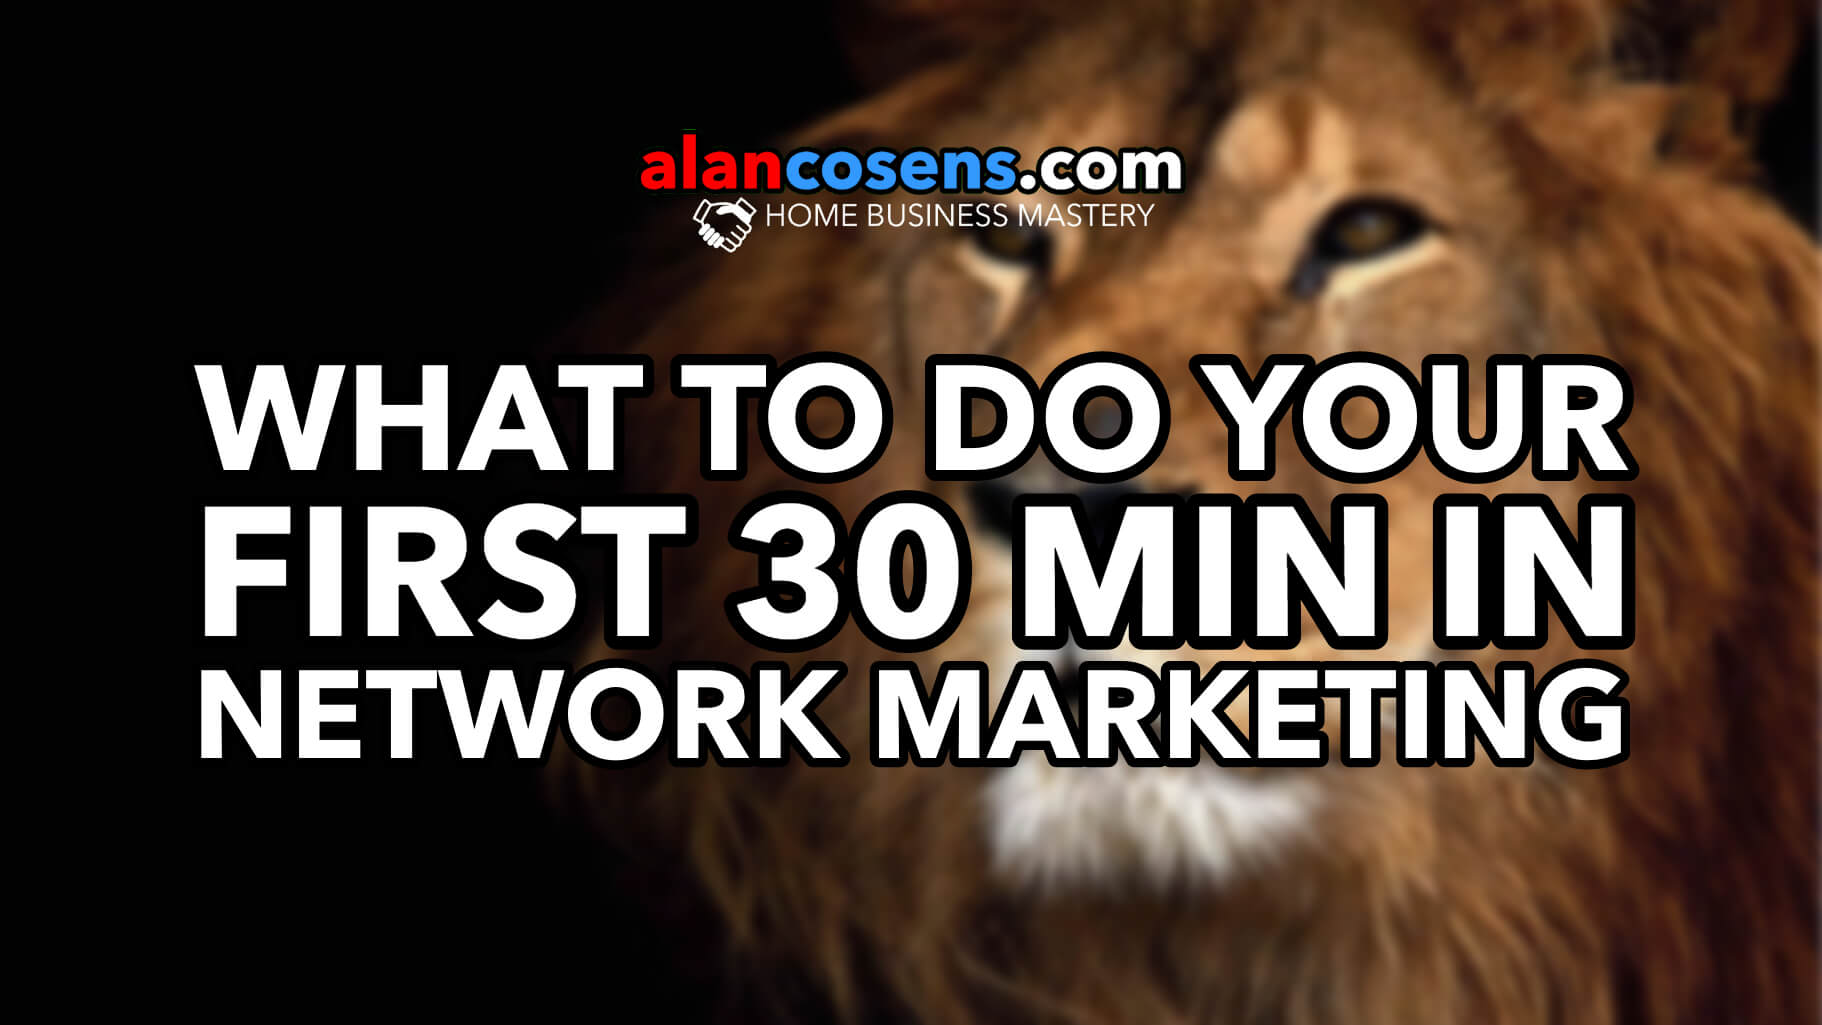 Your First 30 Minutes In Network Marketing